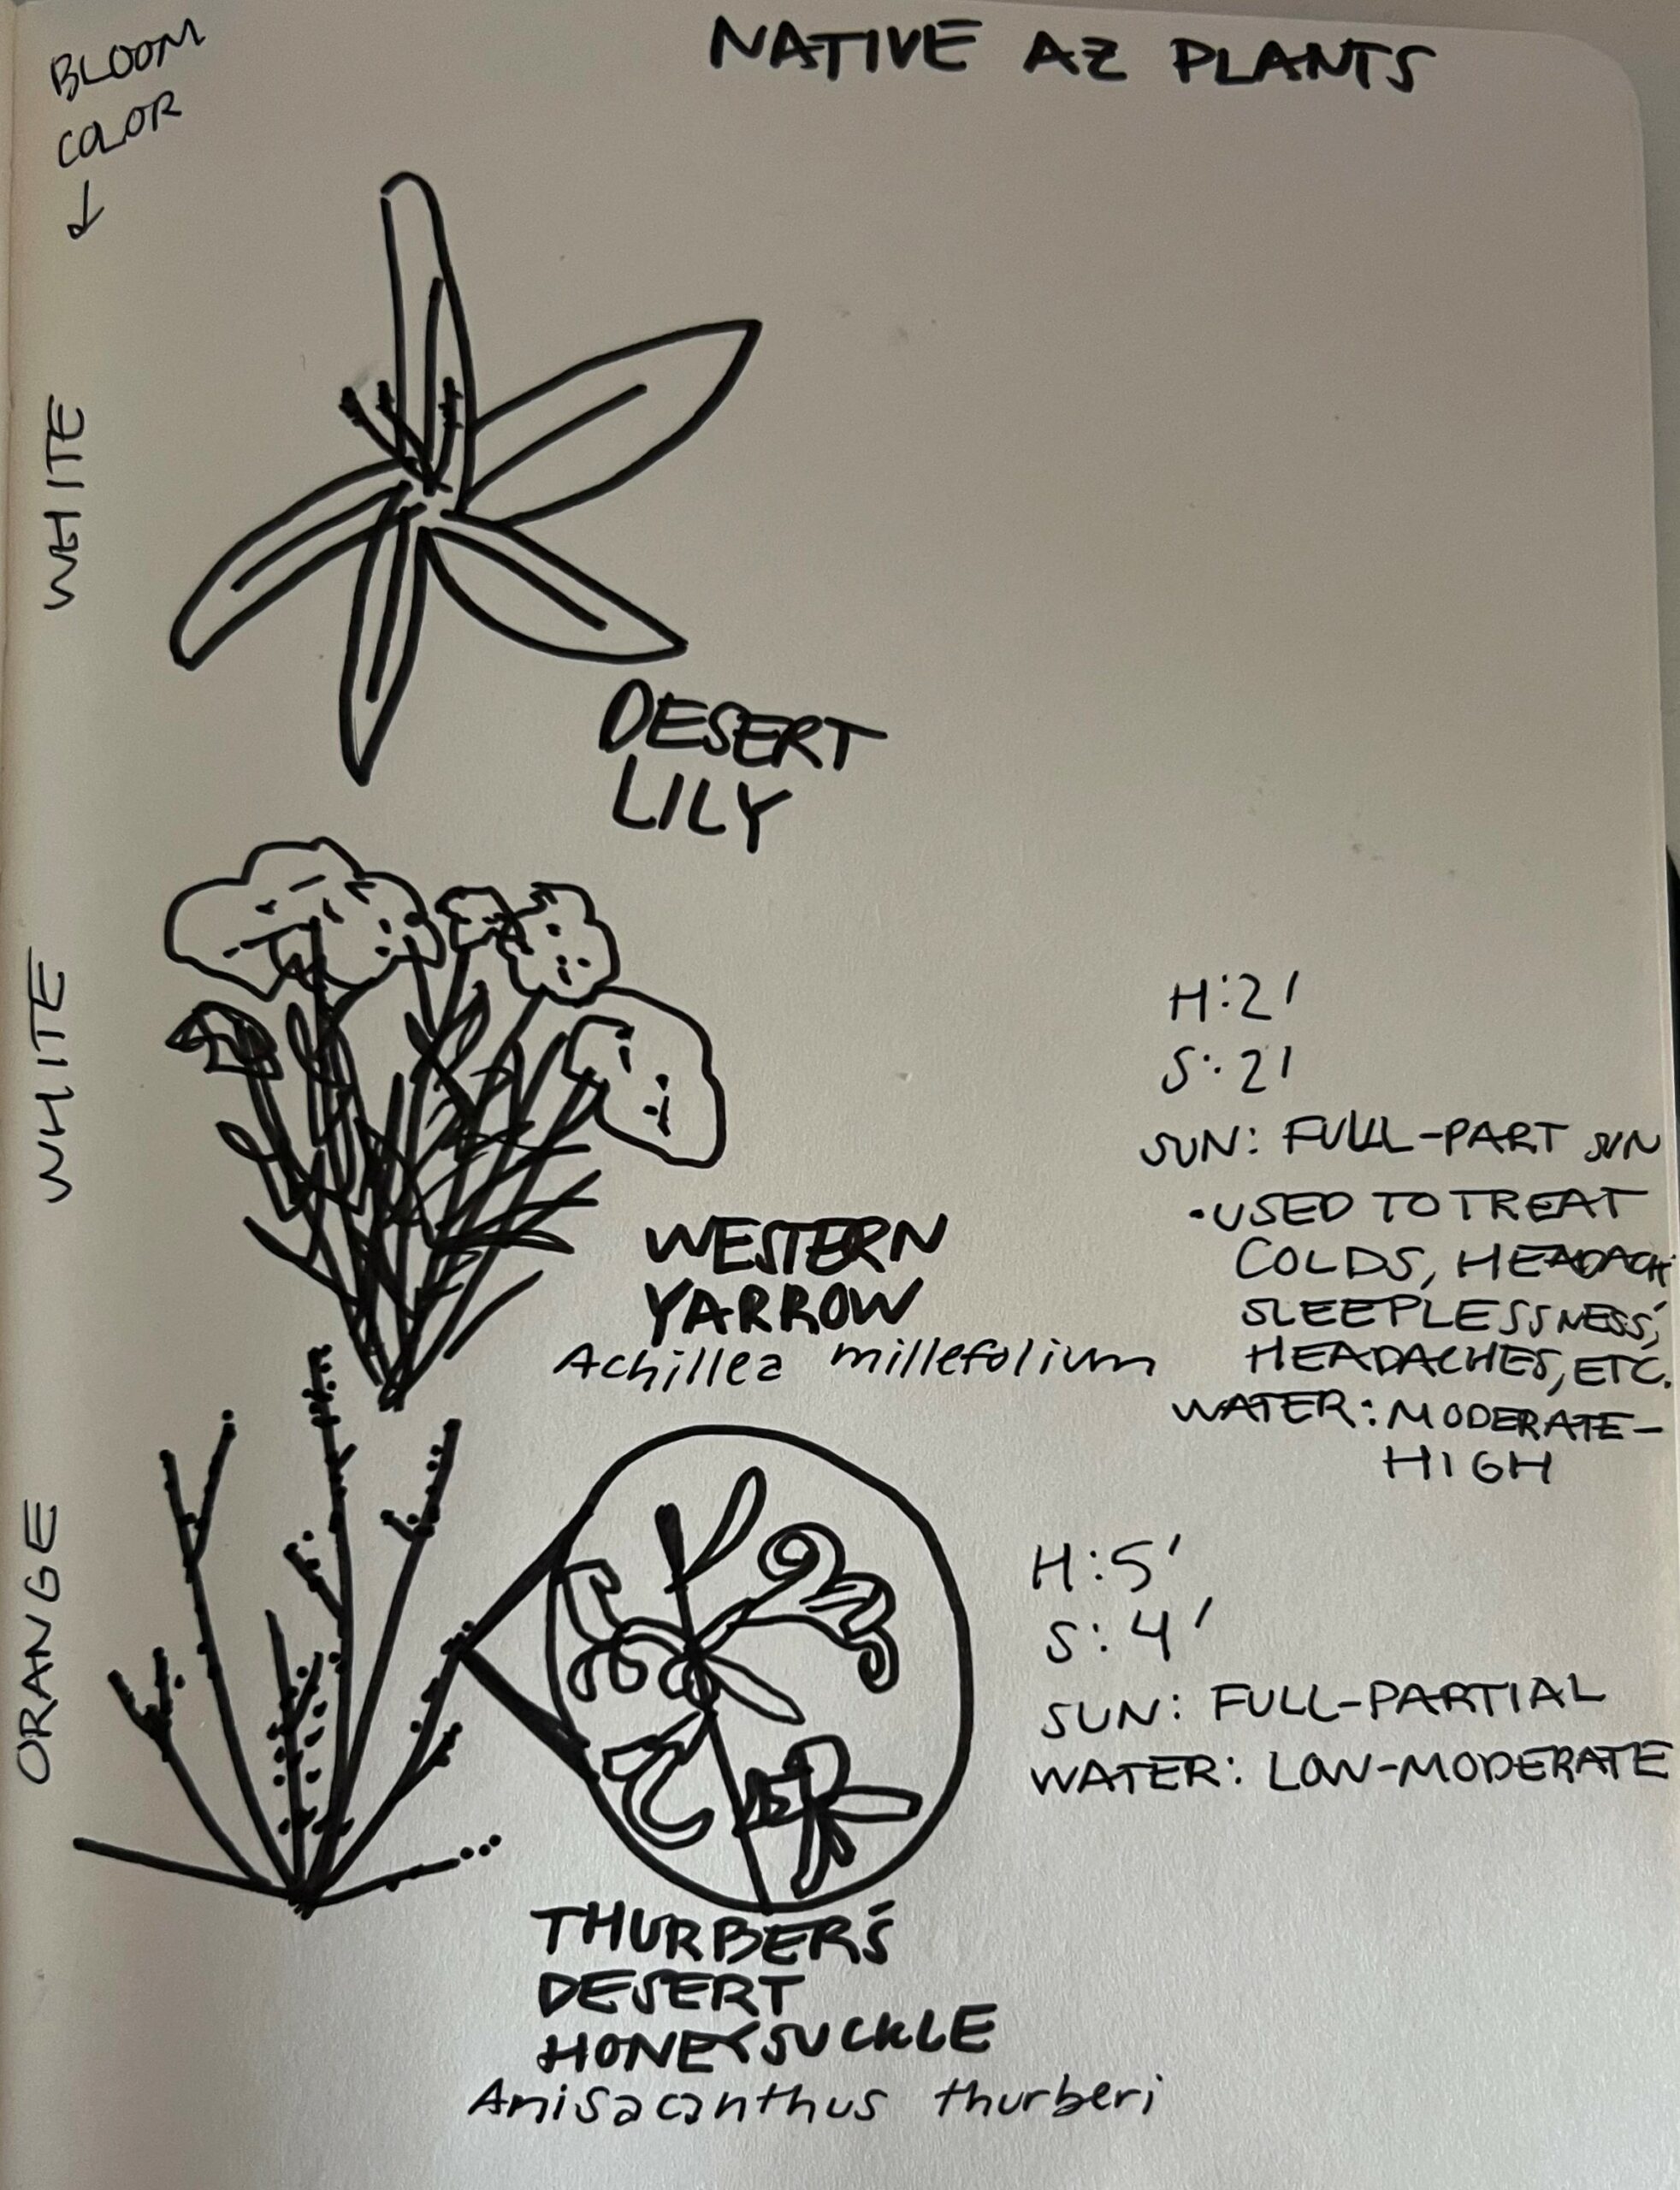 early sketch of the native arizona plants included in landscape architecture plans.